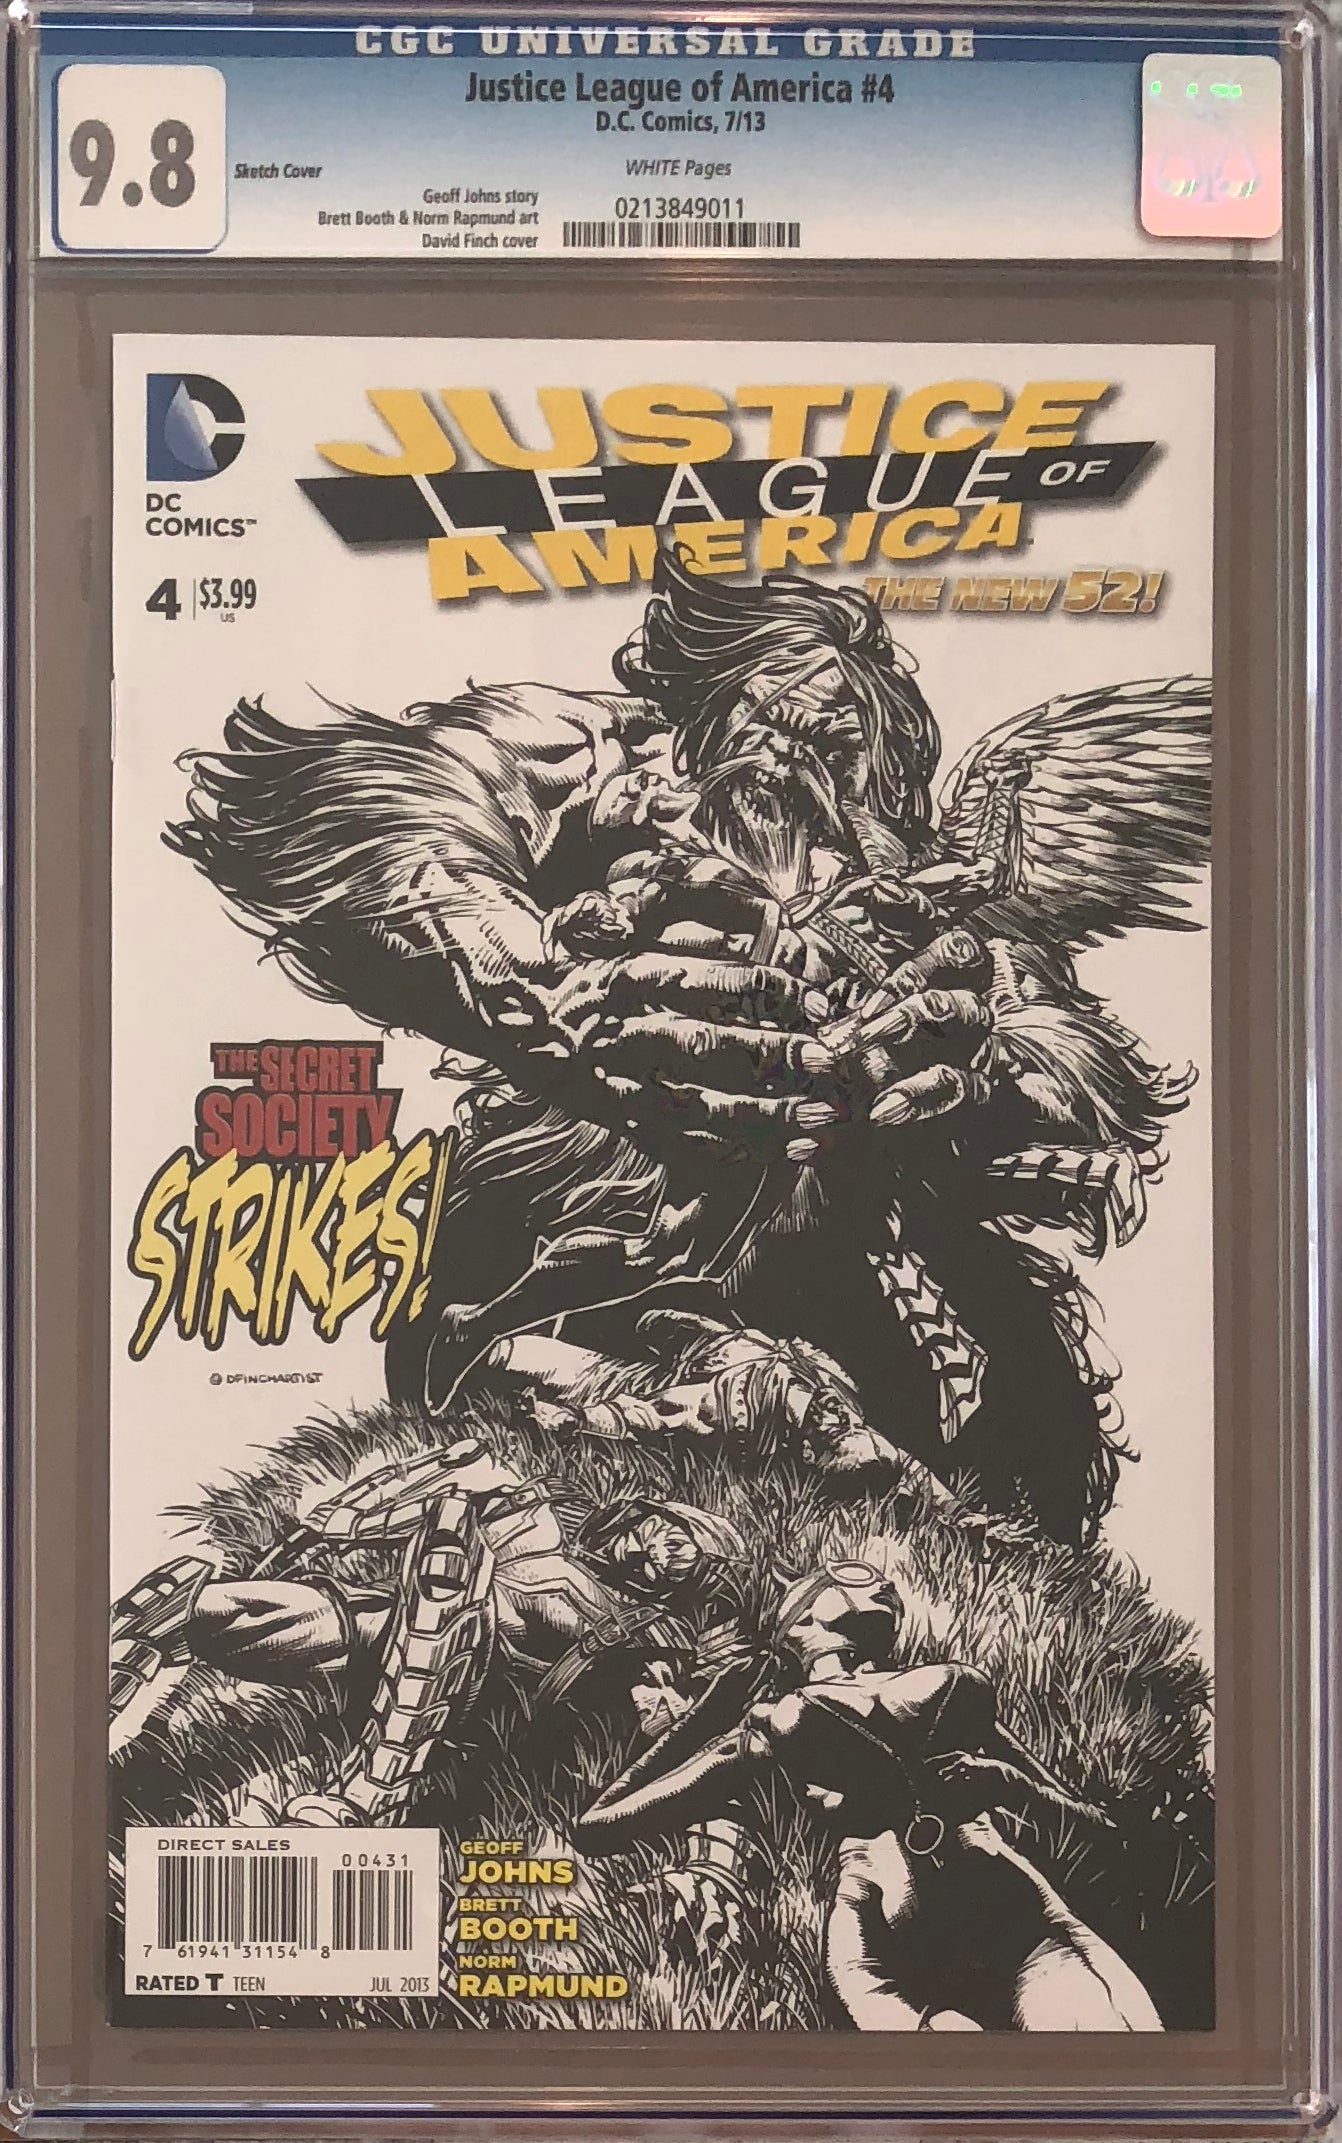 Justice League of America #4 Sketch Variant CGC 9.8